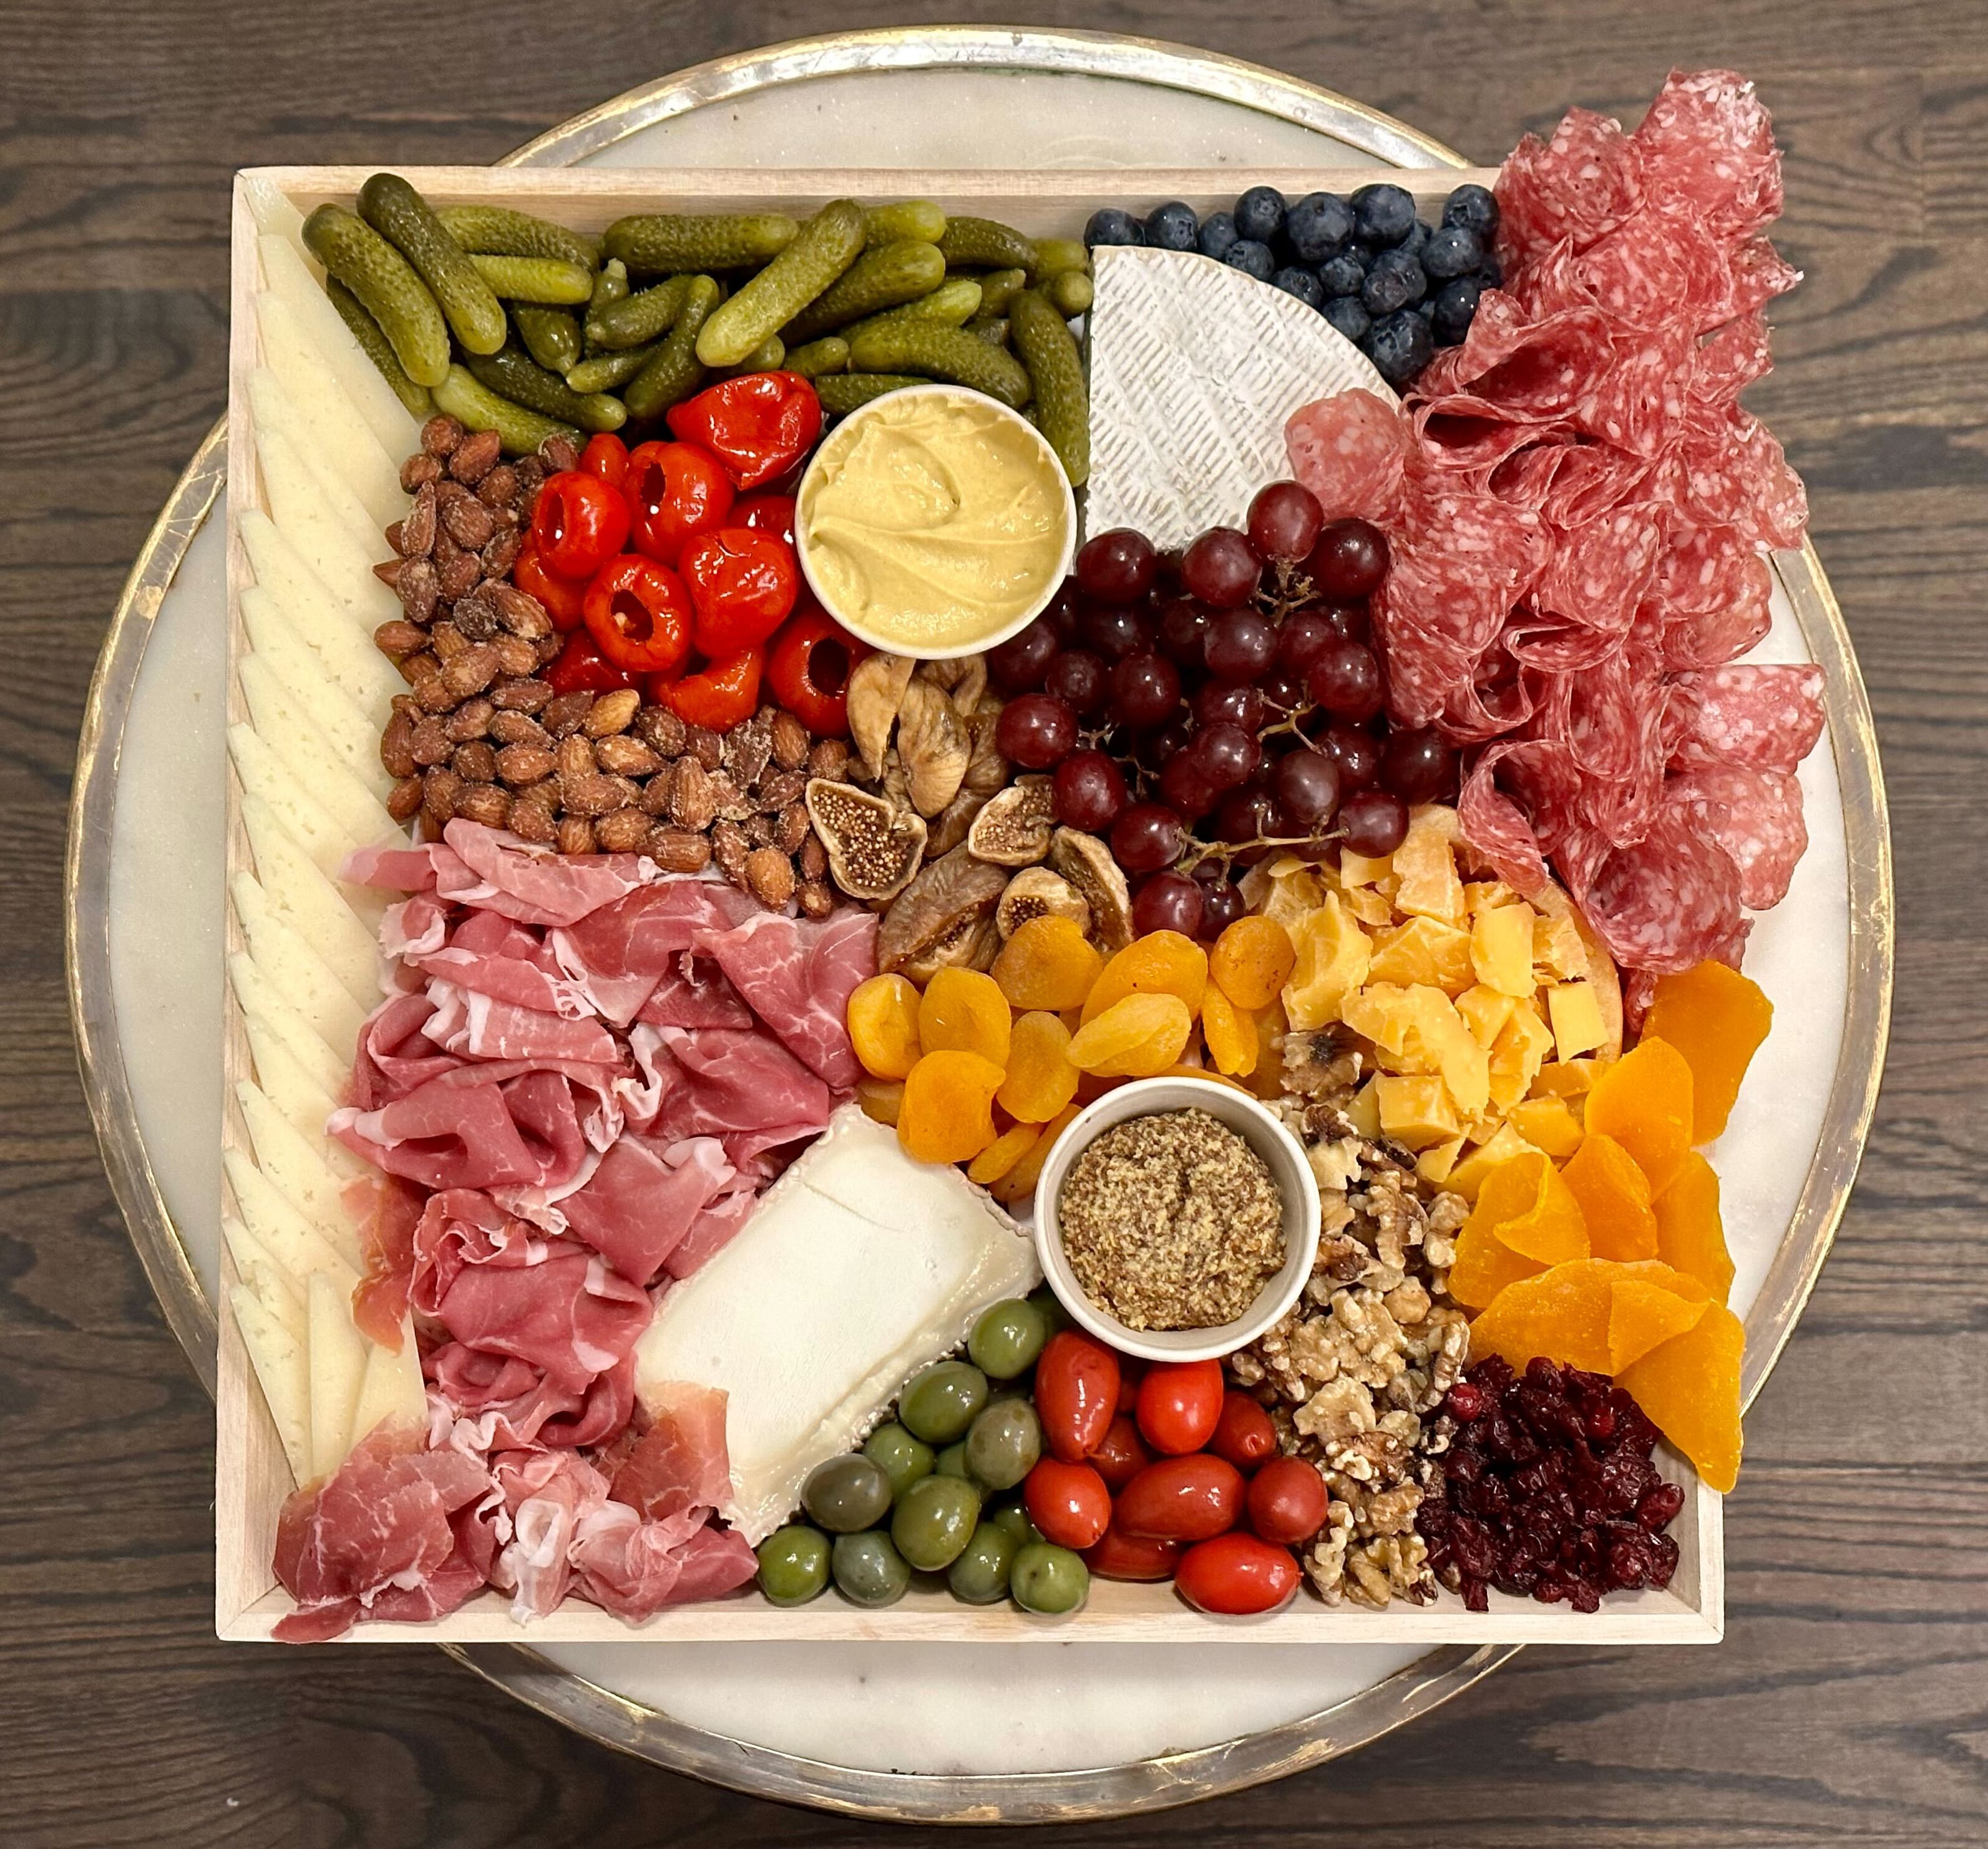 Image is of our Cheese and Charcuterie platter.